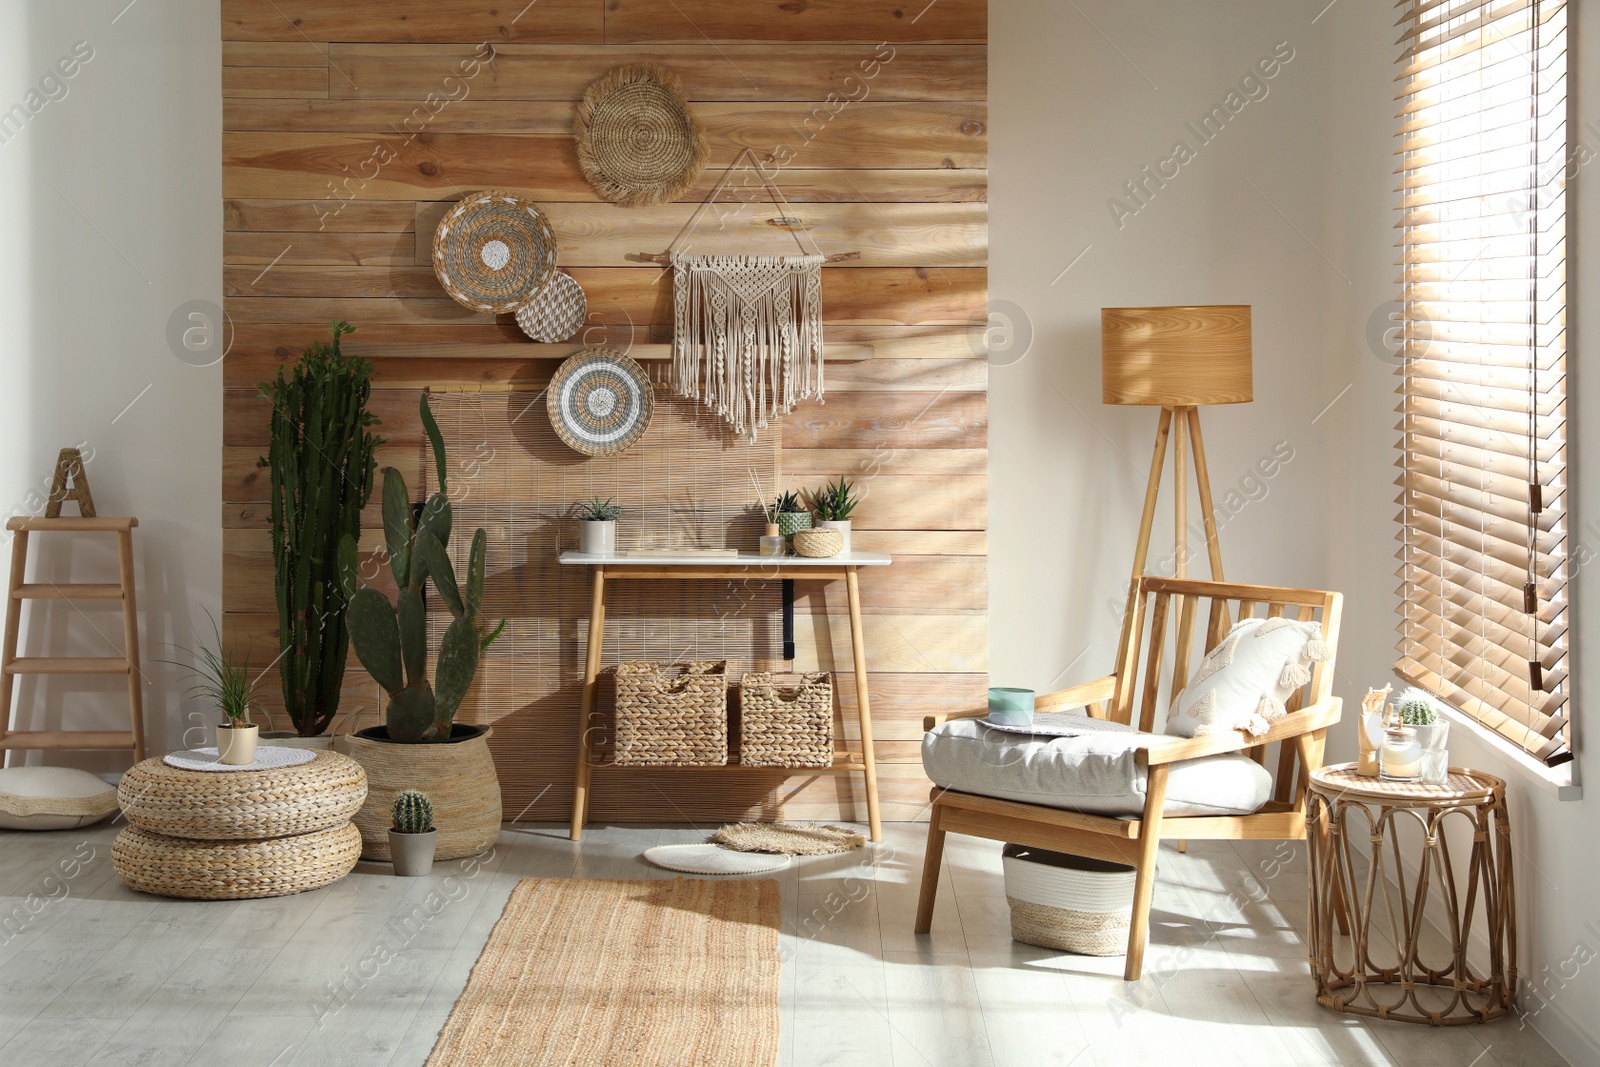 Photo of Room interior with stylish decor and furniture